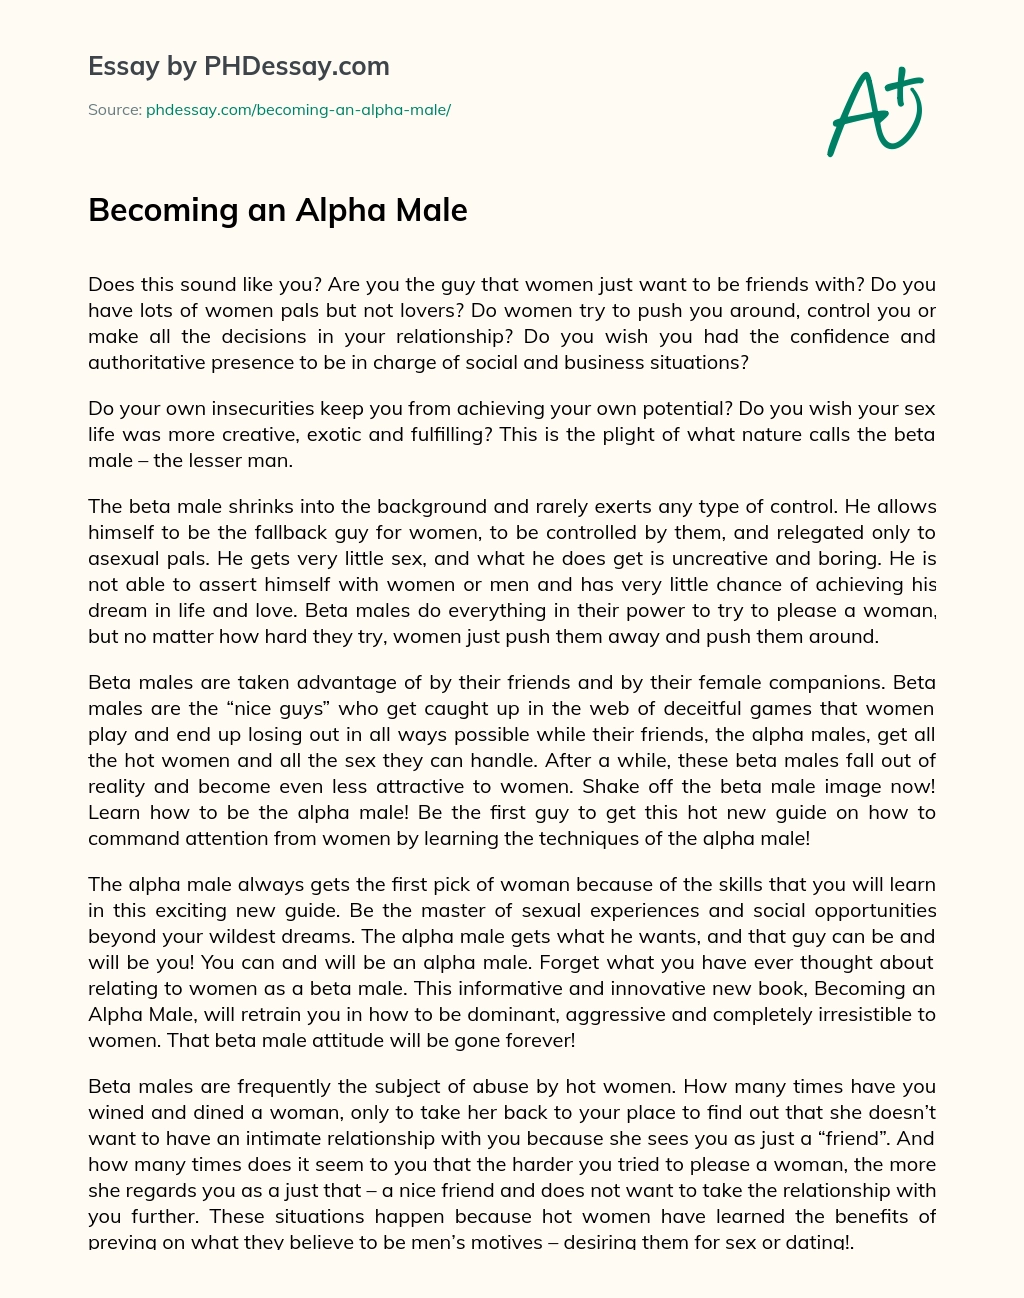 Who is an alpha male